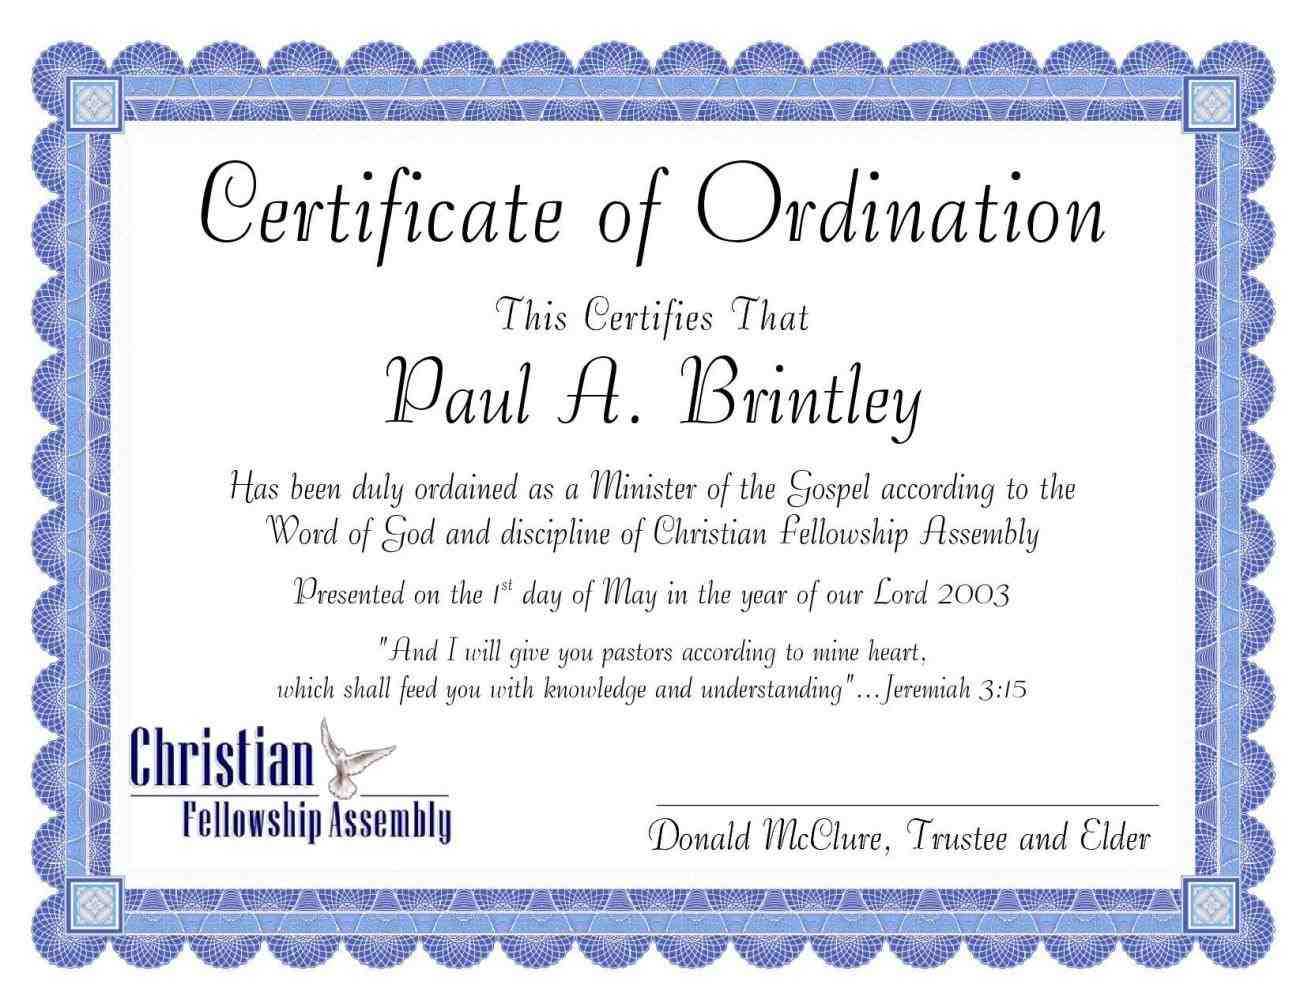 12 Certificate Of Donation Sample | Radaircars For Christian Certificate Template